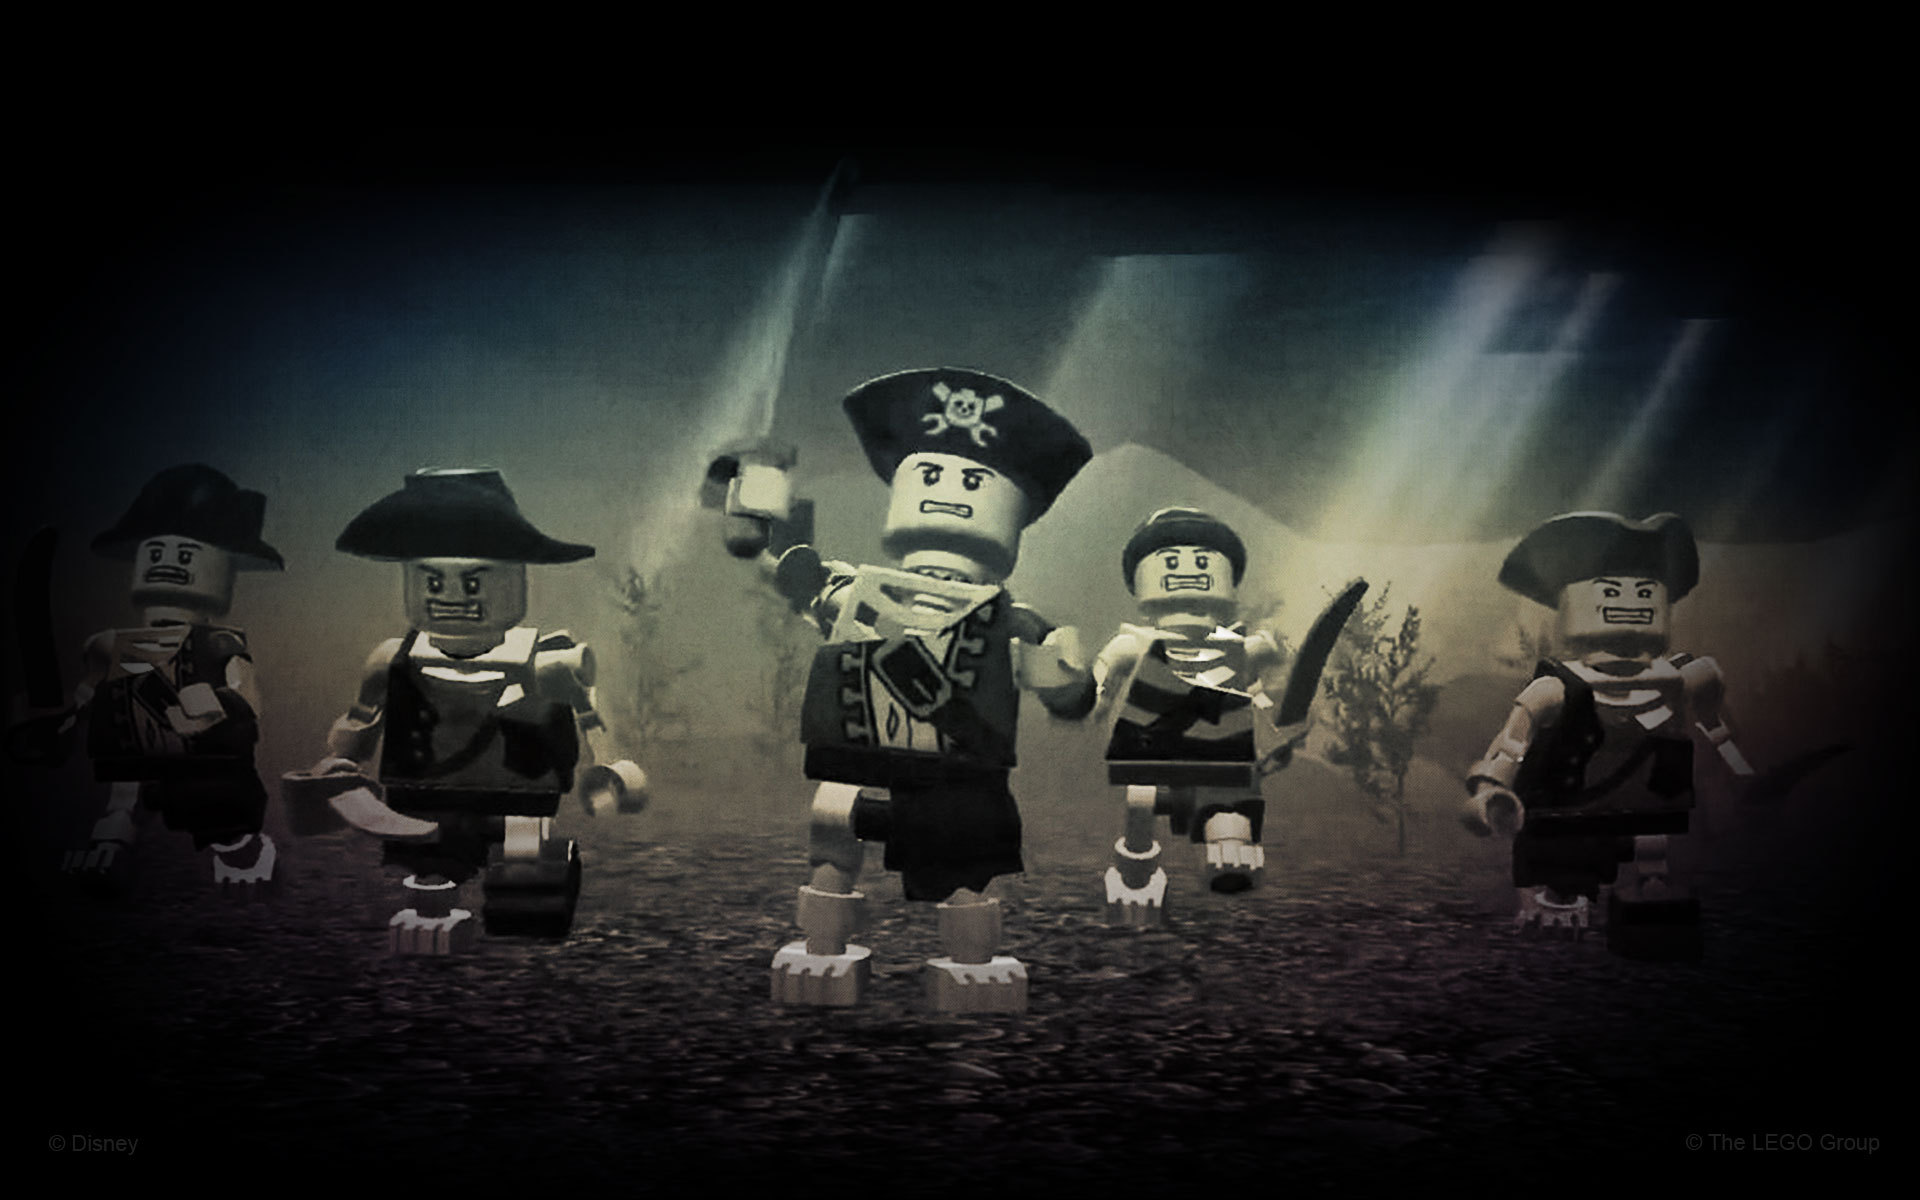 Video Game LEGO Pirates of the Caribbean: The Video Game HD Wallpaper | Background Image